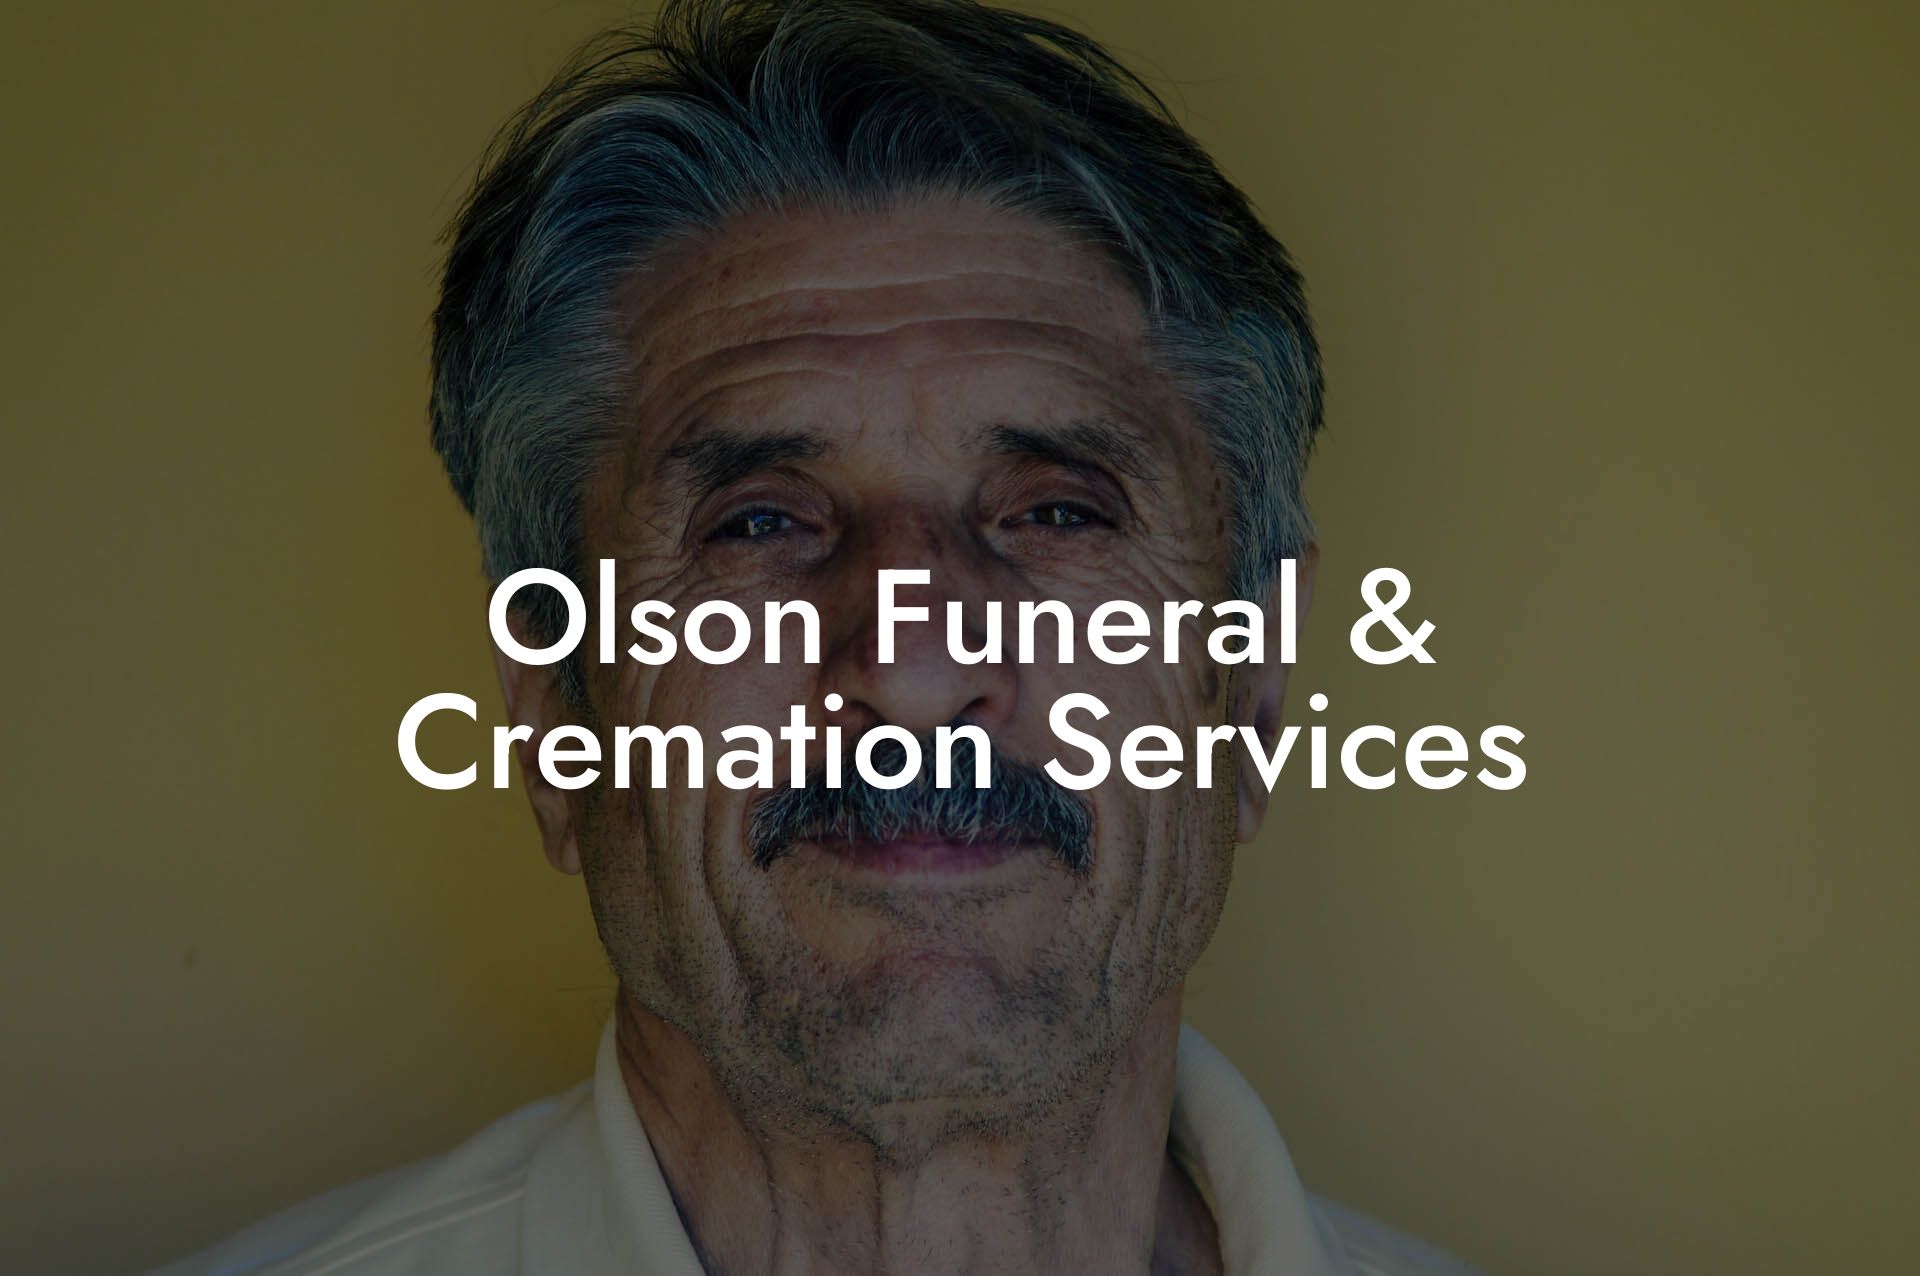 Olson Funeral & Cremation Services